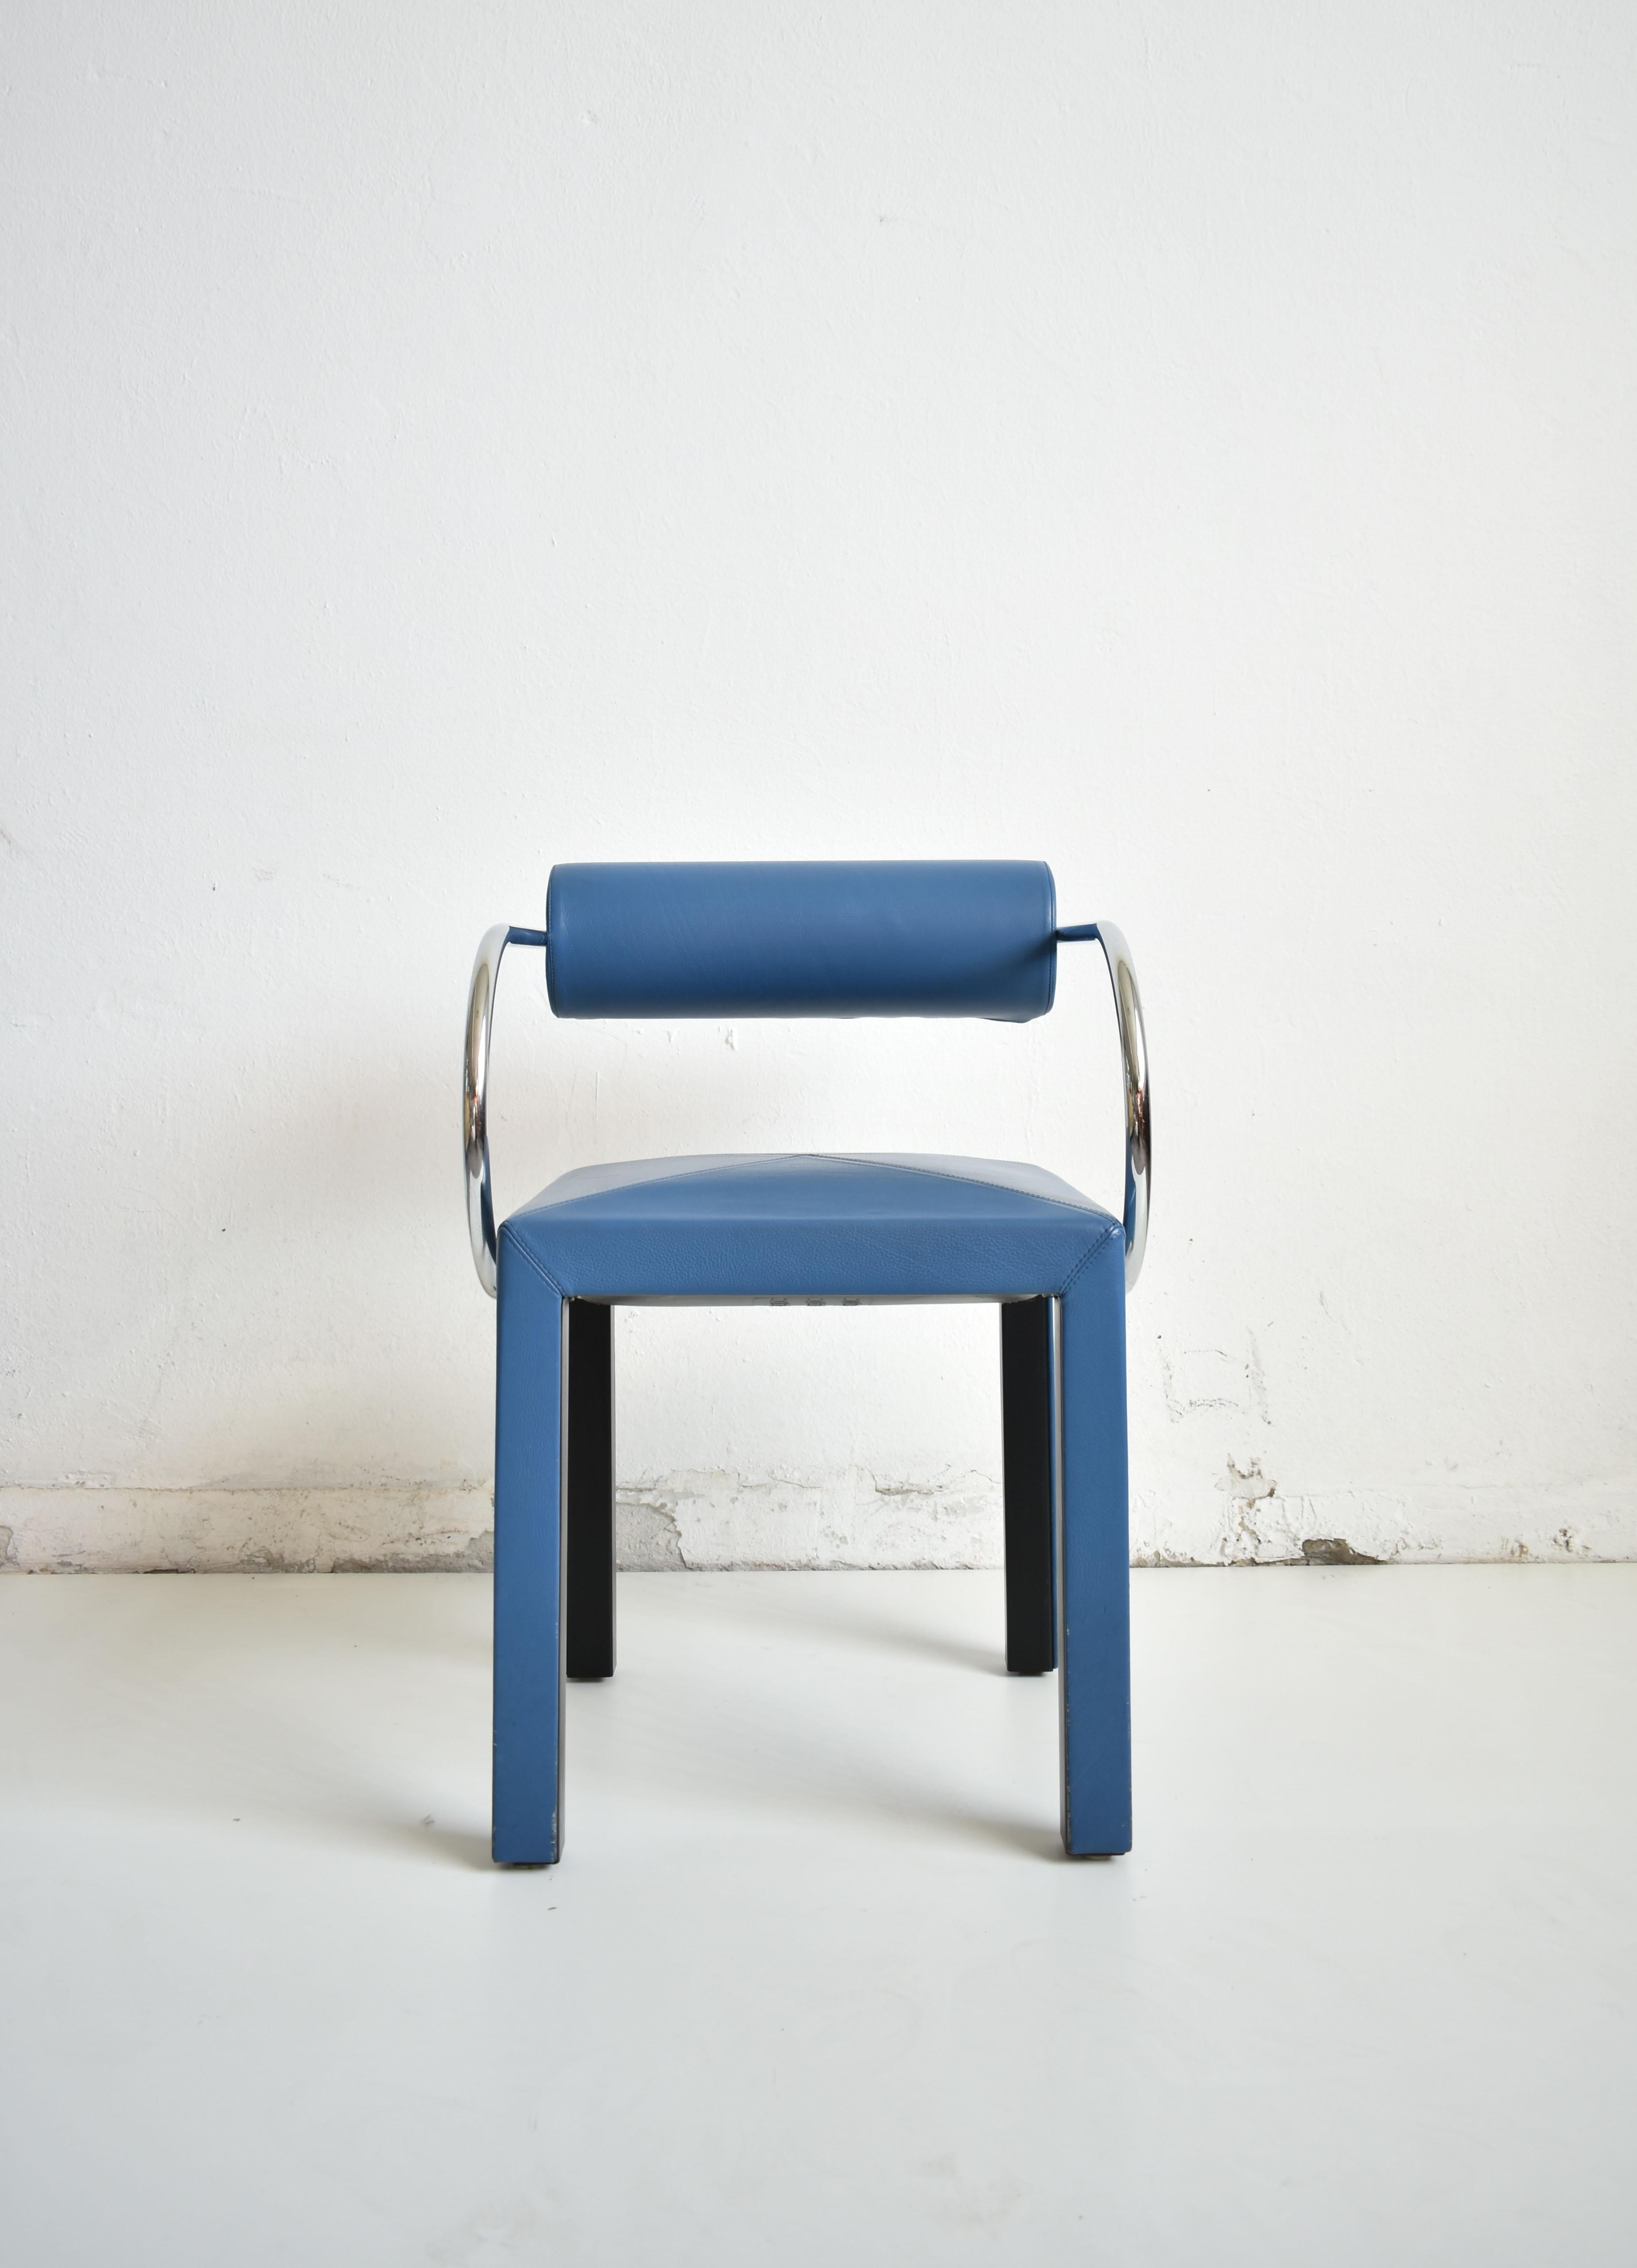 Leather 'Arconda' chair from Arcadia series
Legs, seat and the backrest are upholstered in soft, top-quality blue color Italian leather. The armrest is made of chrome-plated metal. Producer's mark is visible on the bottom side of the